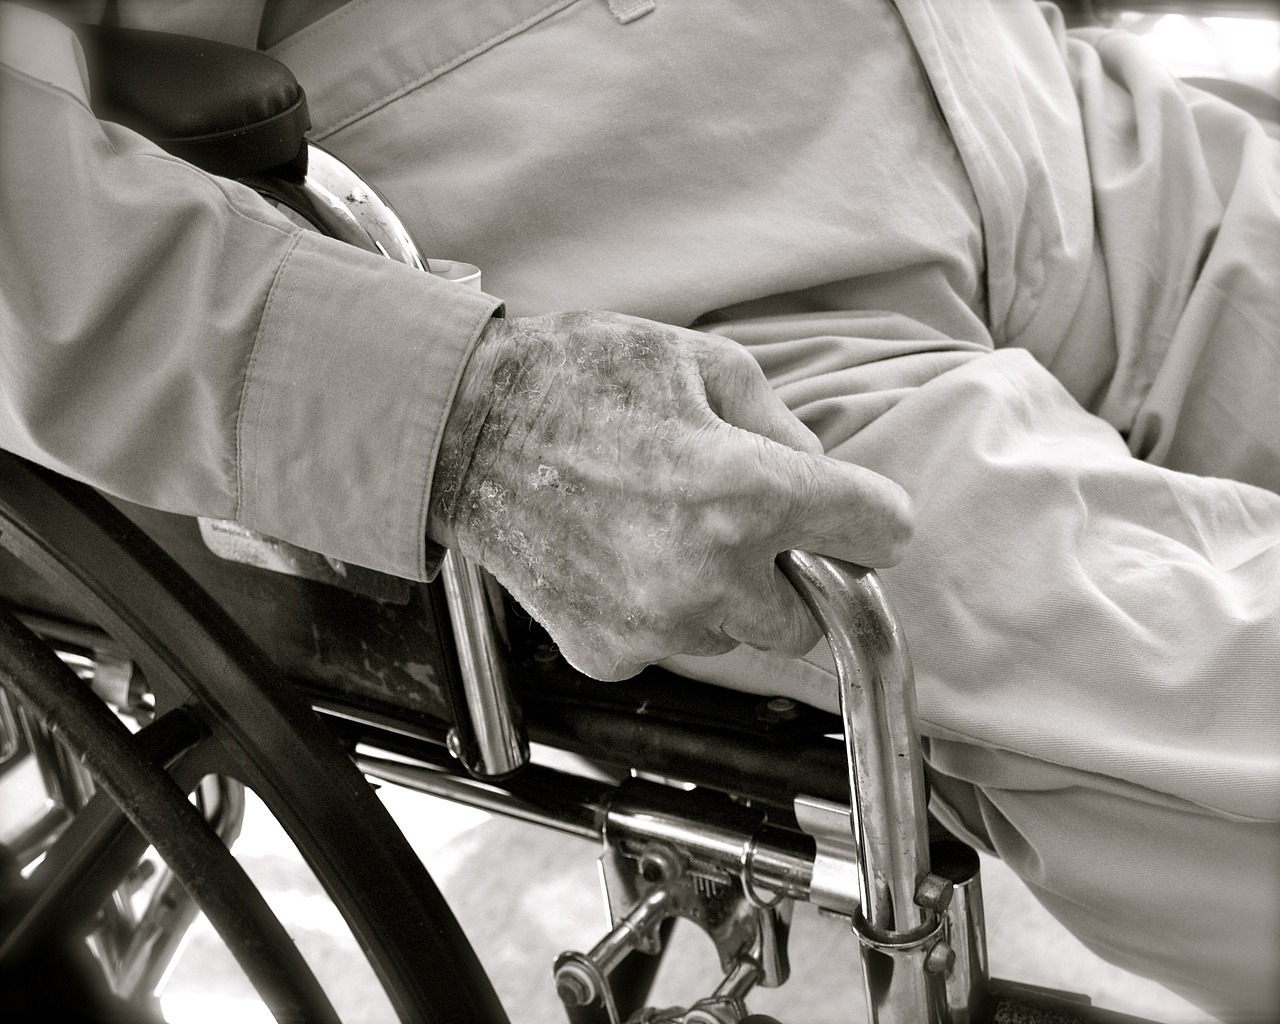 New COVID restrictions tipped for aged care in S.A.